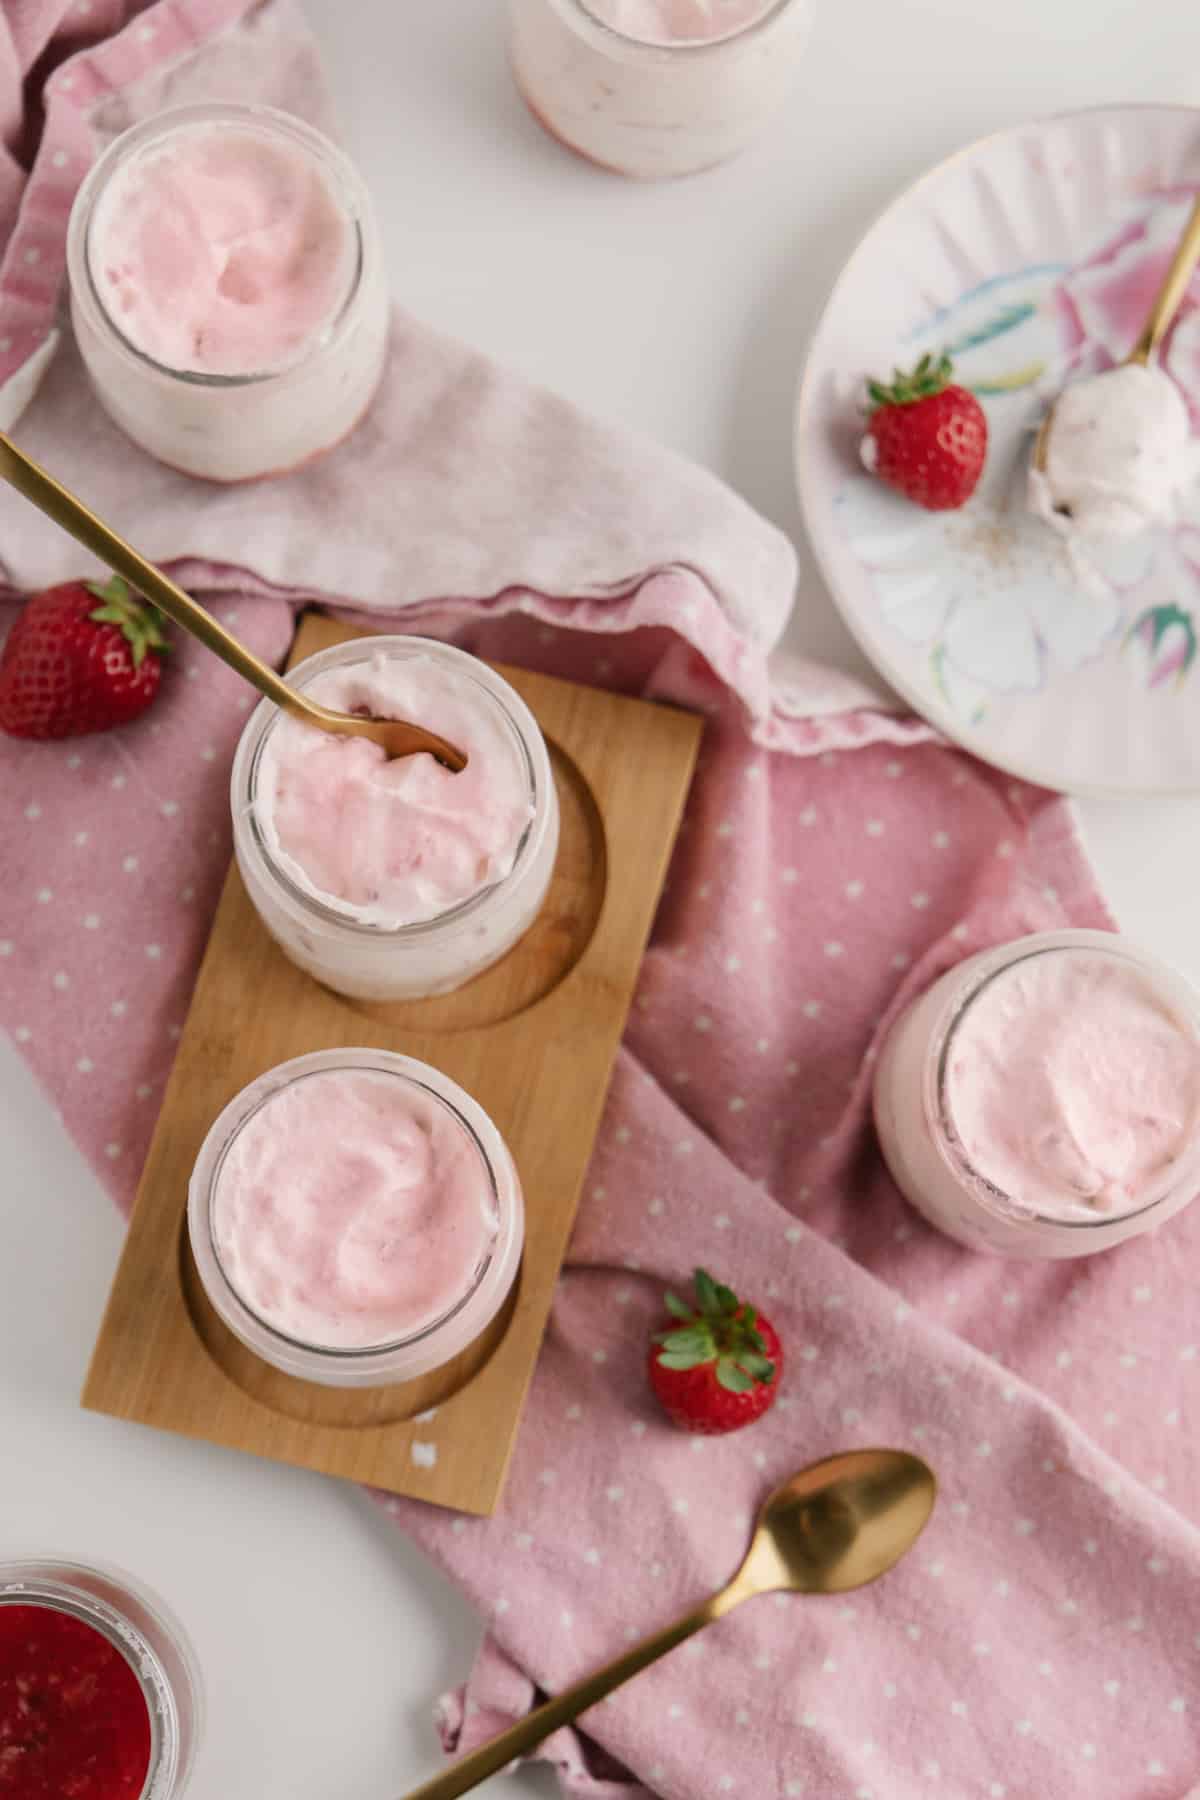 Overhead shot of jars of strawberry mousse